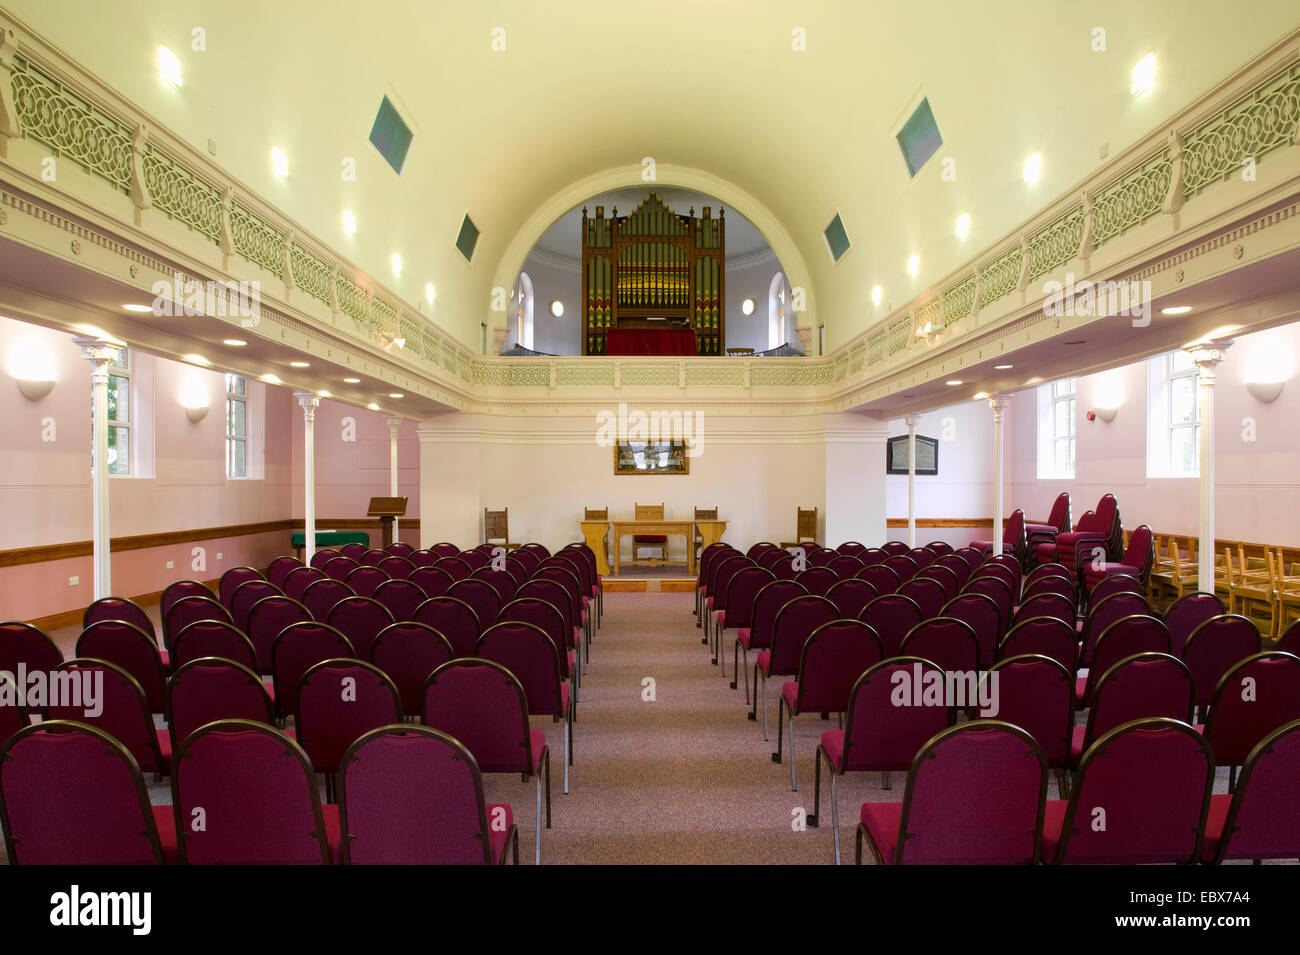 United Reformed Church Great Dunmow Banque D'Images